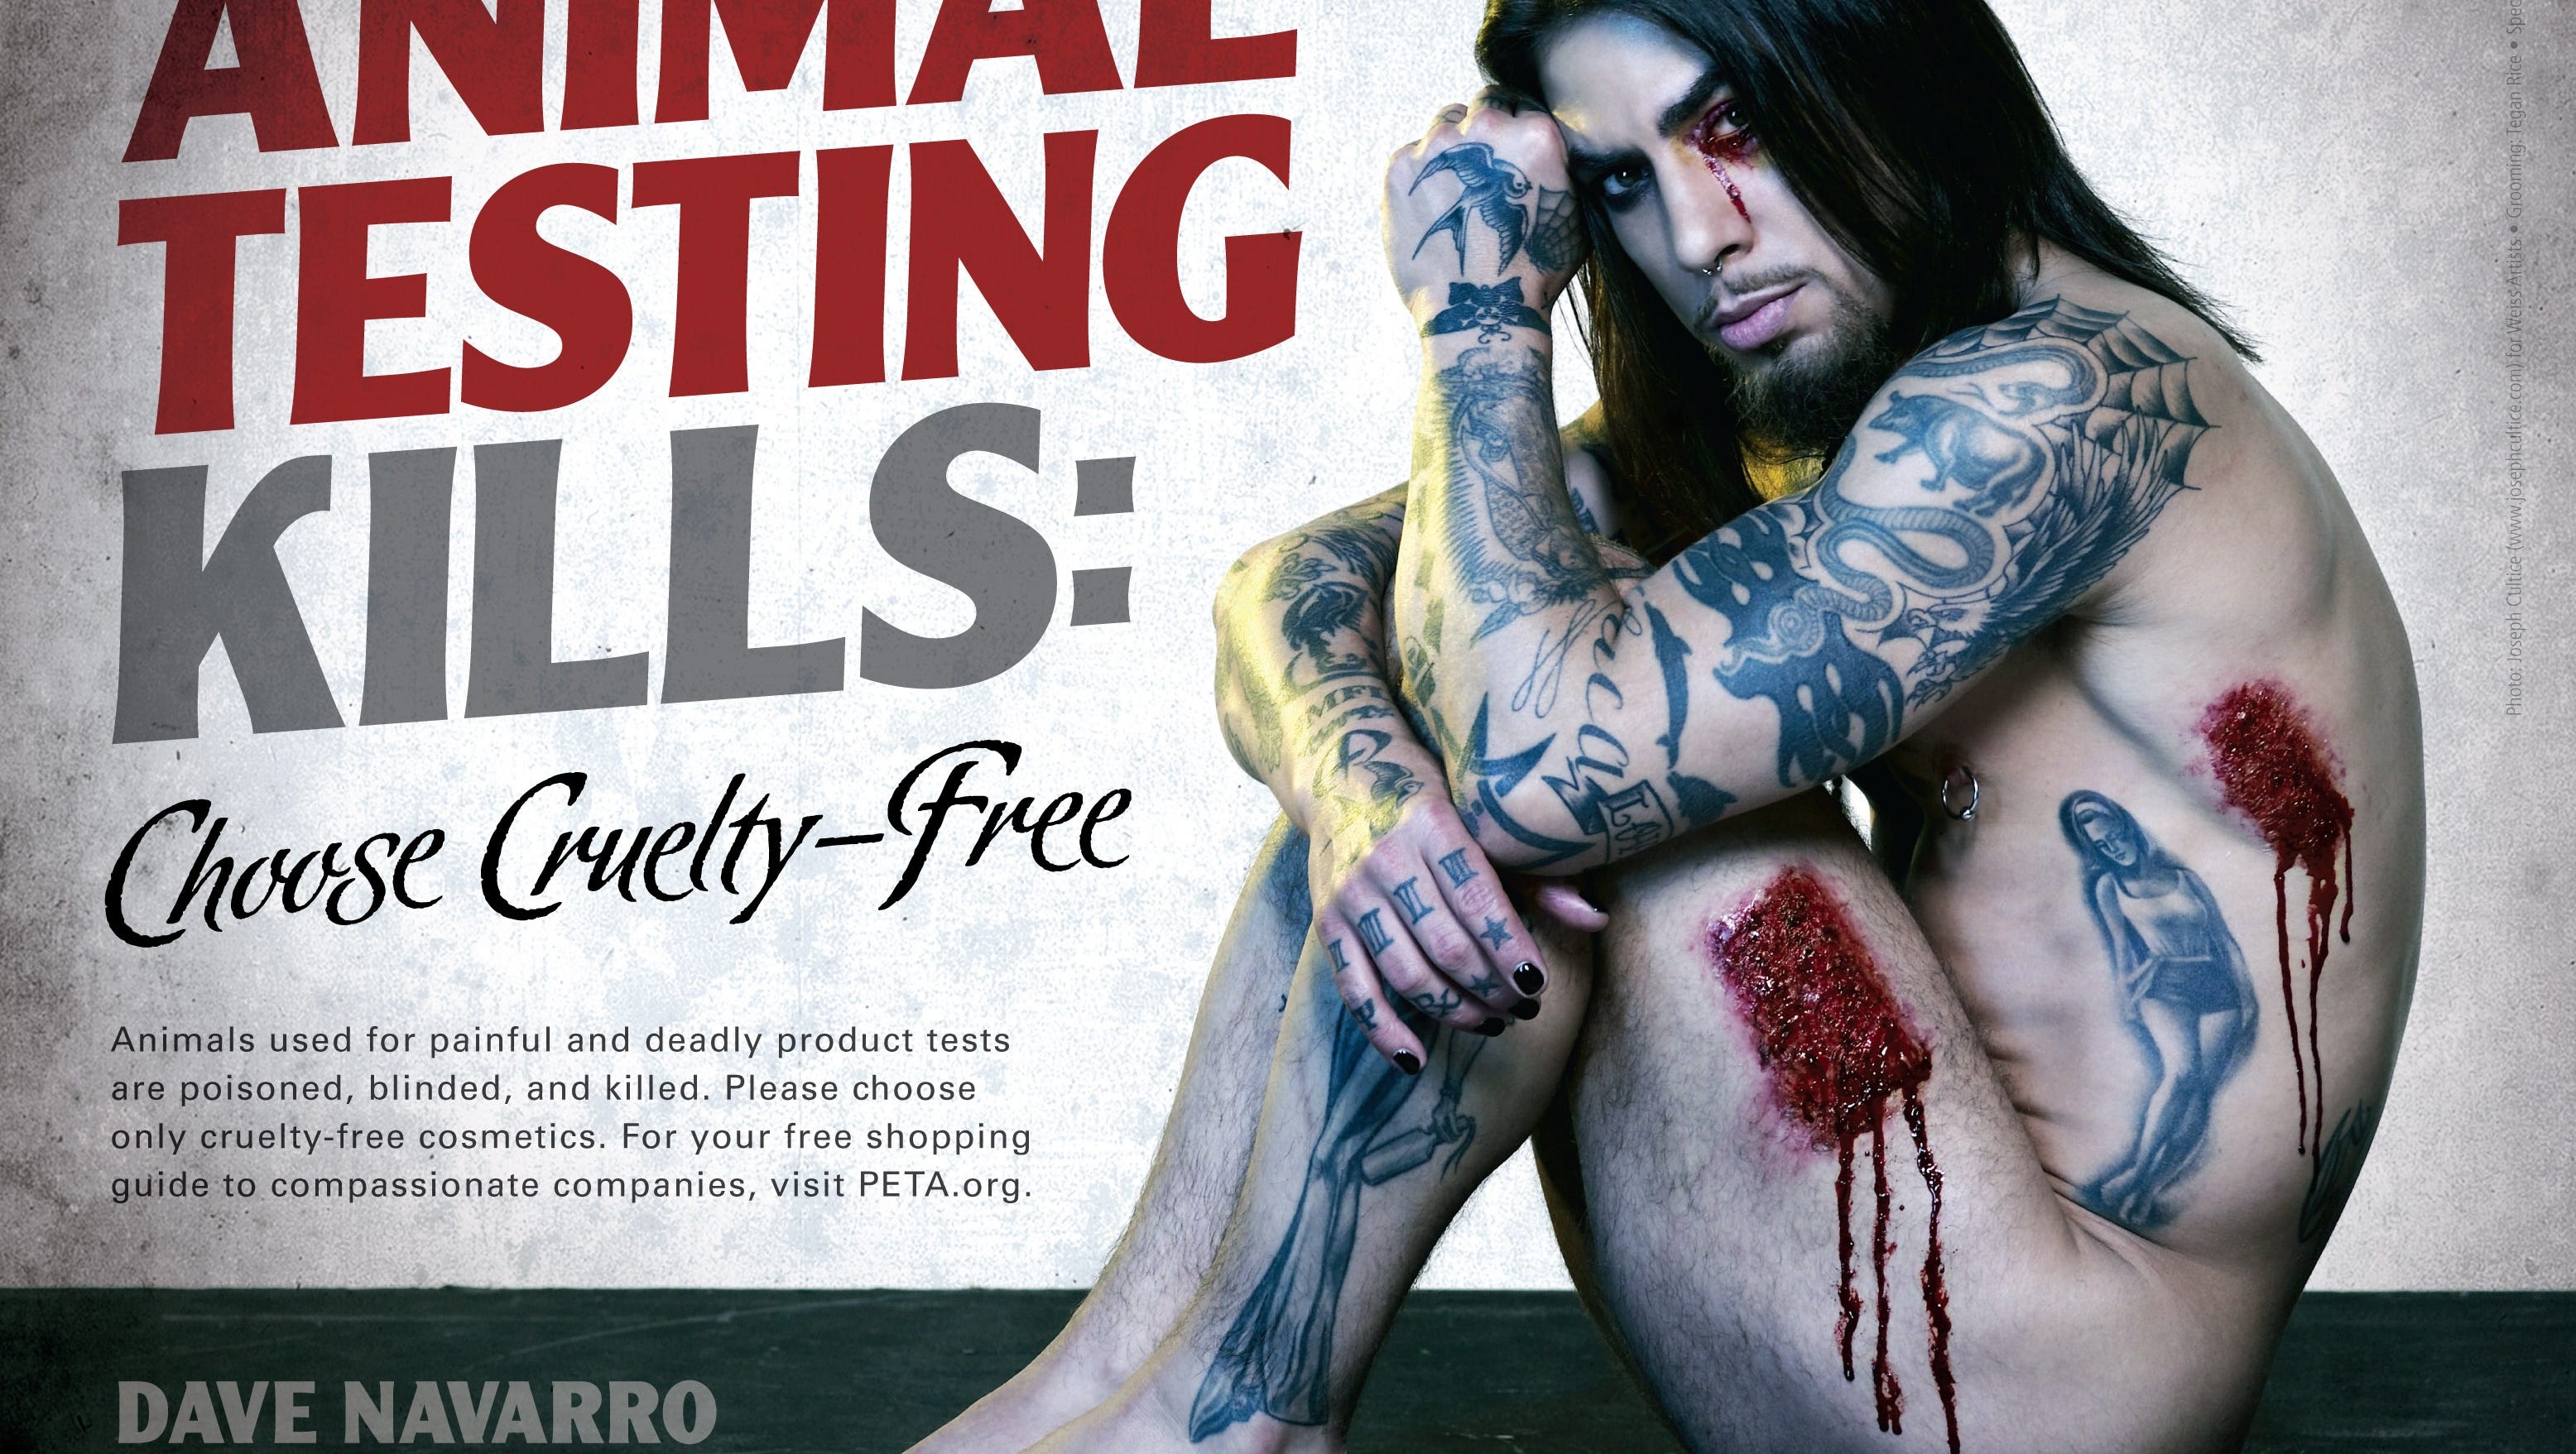 ...http://nbclatino.com/2013/01/04/dave-navarro-gets-real-about-tattoos-and...